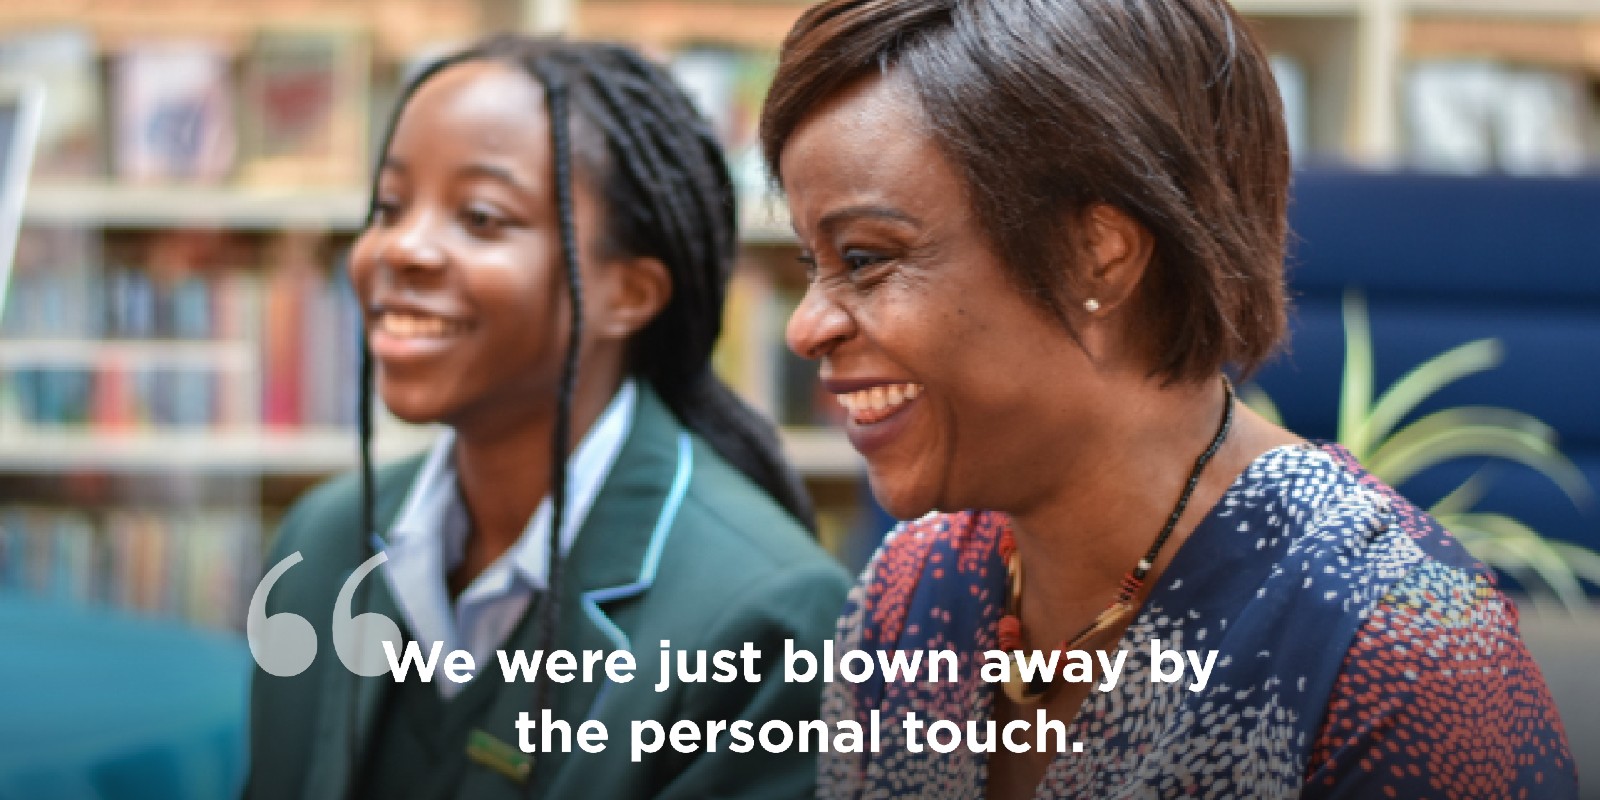 mum describes how they were blown away by the personal touch at downe house boarding school